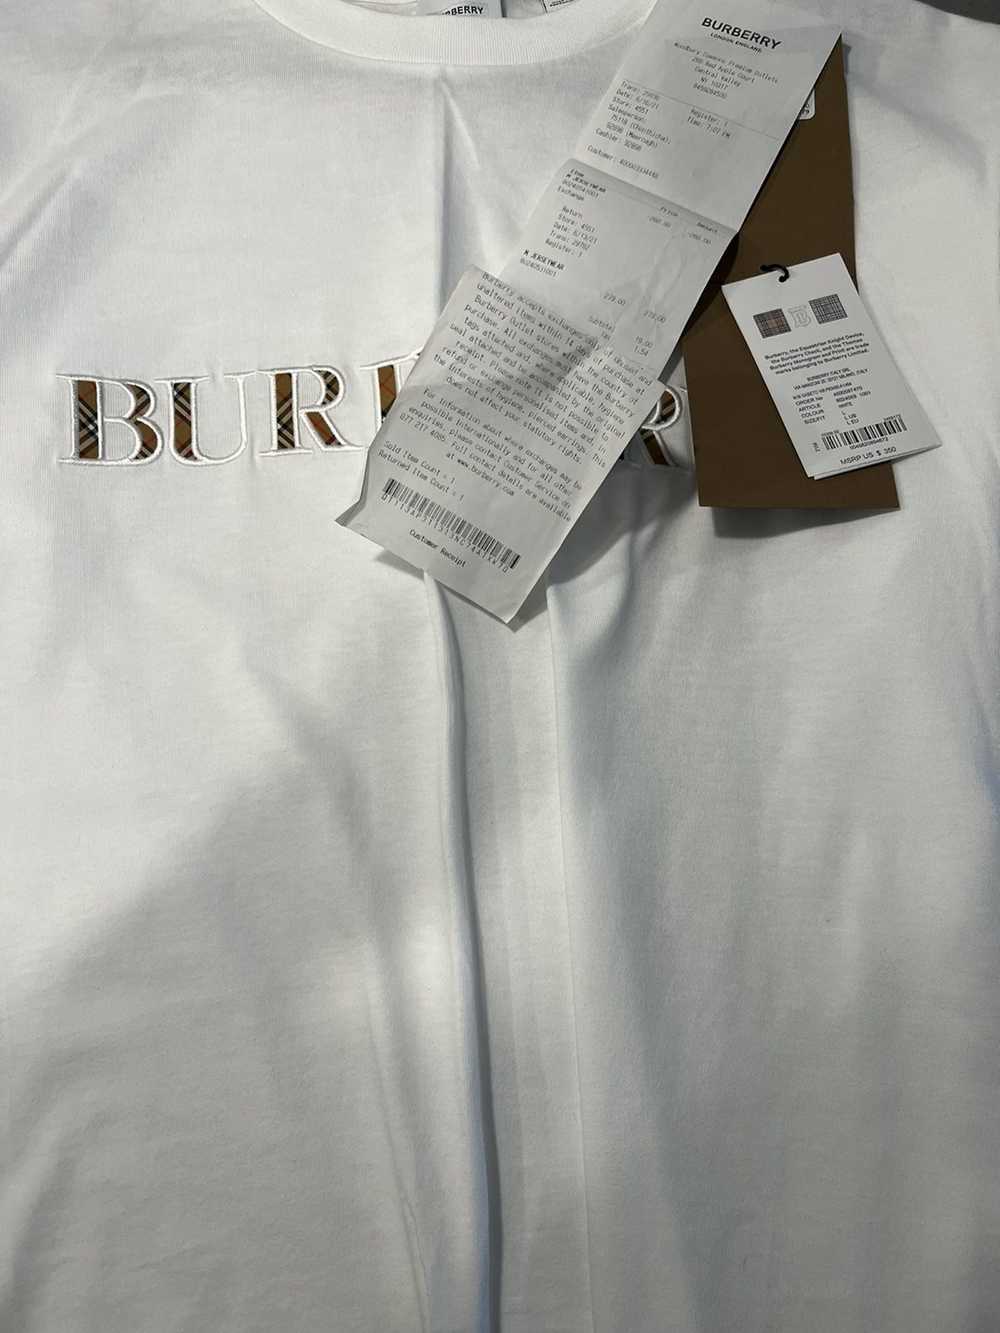 Burberry Burberry t shirt dry clean no stains wor… - image 3